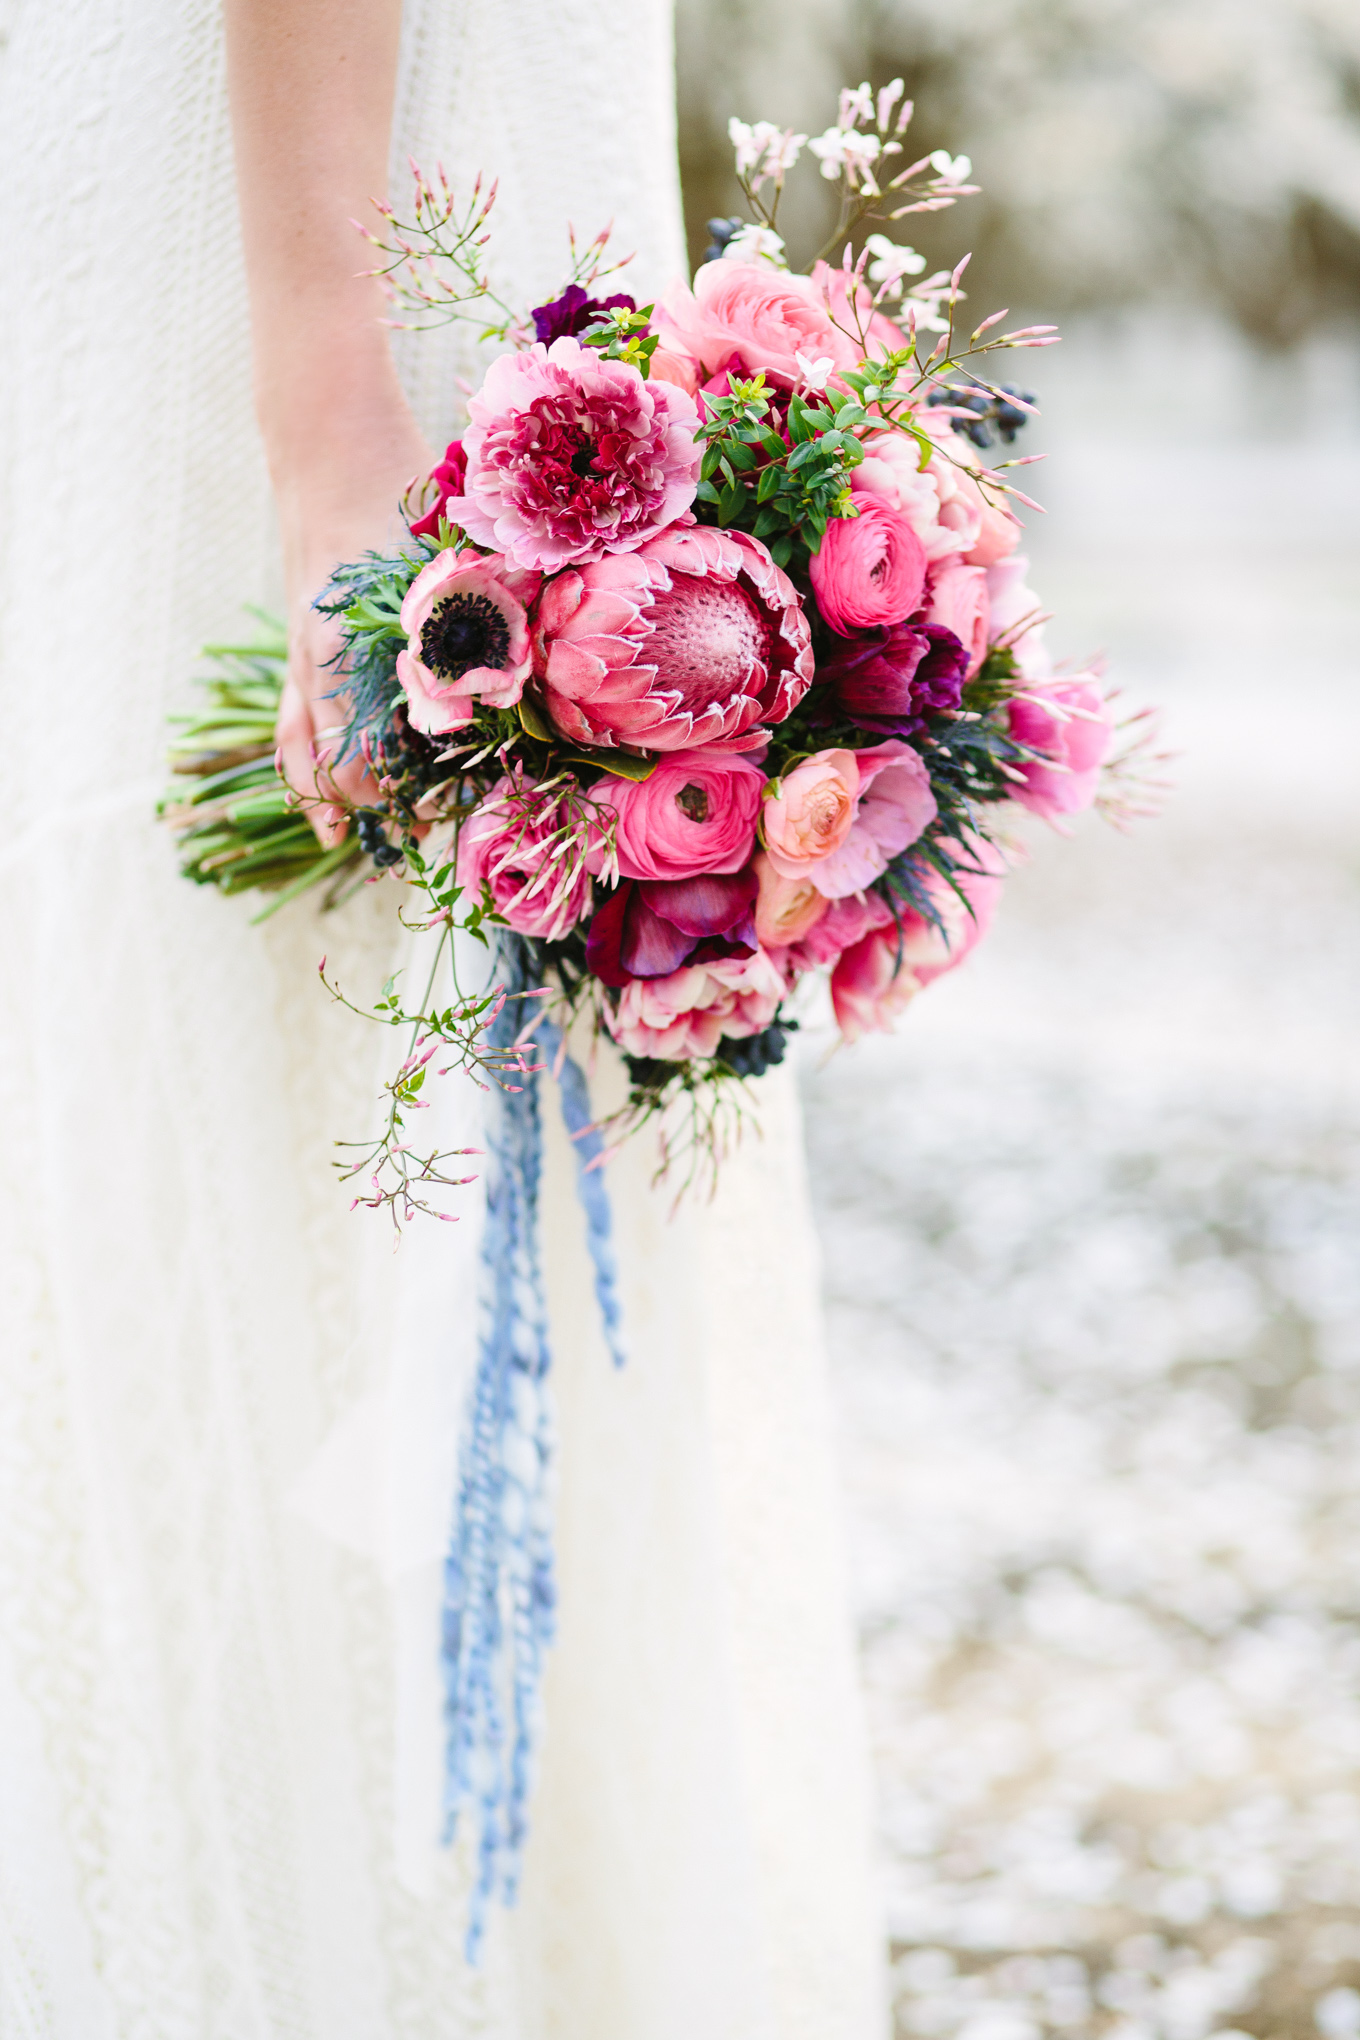 Boho protea and pink bouquet in an almond orchard | Beautiful bridal bouquet inspiration and advice | Colorful and elevated wedding photography for fun-loving couples in Southern California | #weddingflowers #weddingbouquet #bridebouquet #bouquetideas #uniquebouquet   Source: Mary Costa Photography | Los Angeles